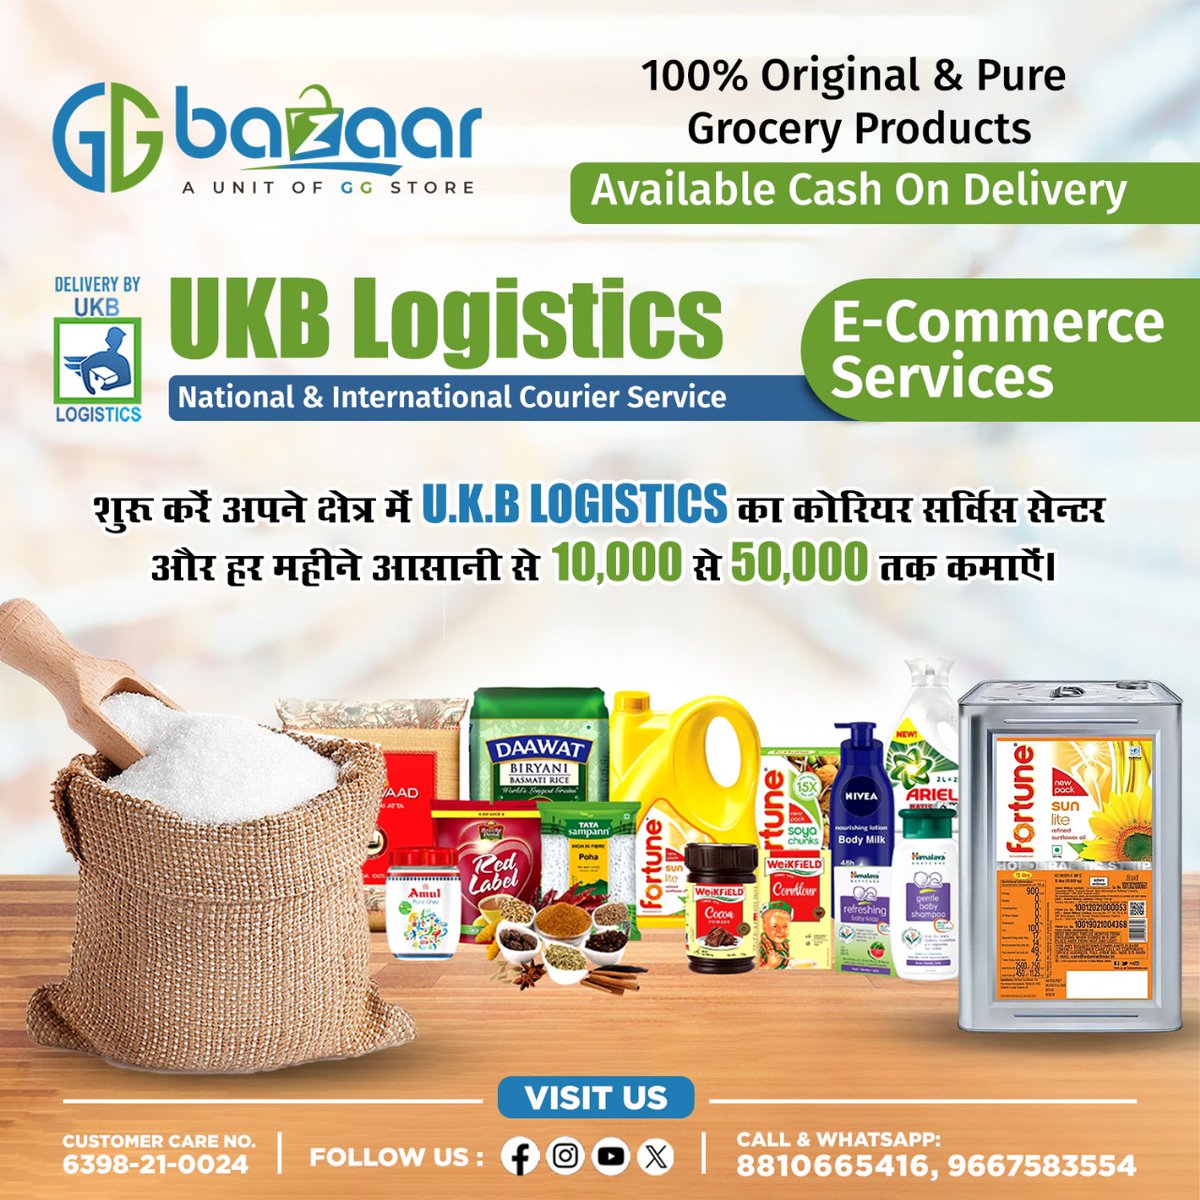 Start your very own UKB Logistics courier service center in your area and earn between Rs 10,000 and Rs 50,000 monthly.  Contact us for more information at 8810665416 or 9667583554 
#ggbazaar #bazaar #onlineshopping #onlineshop #freejal #courierservice #courier #pure #grocery